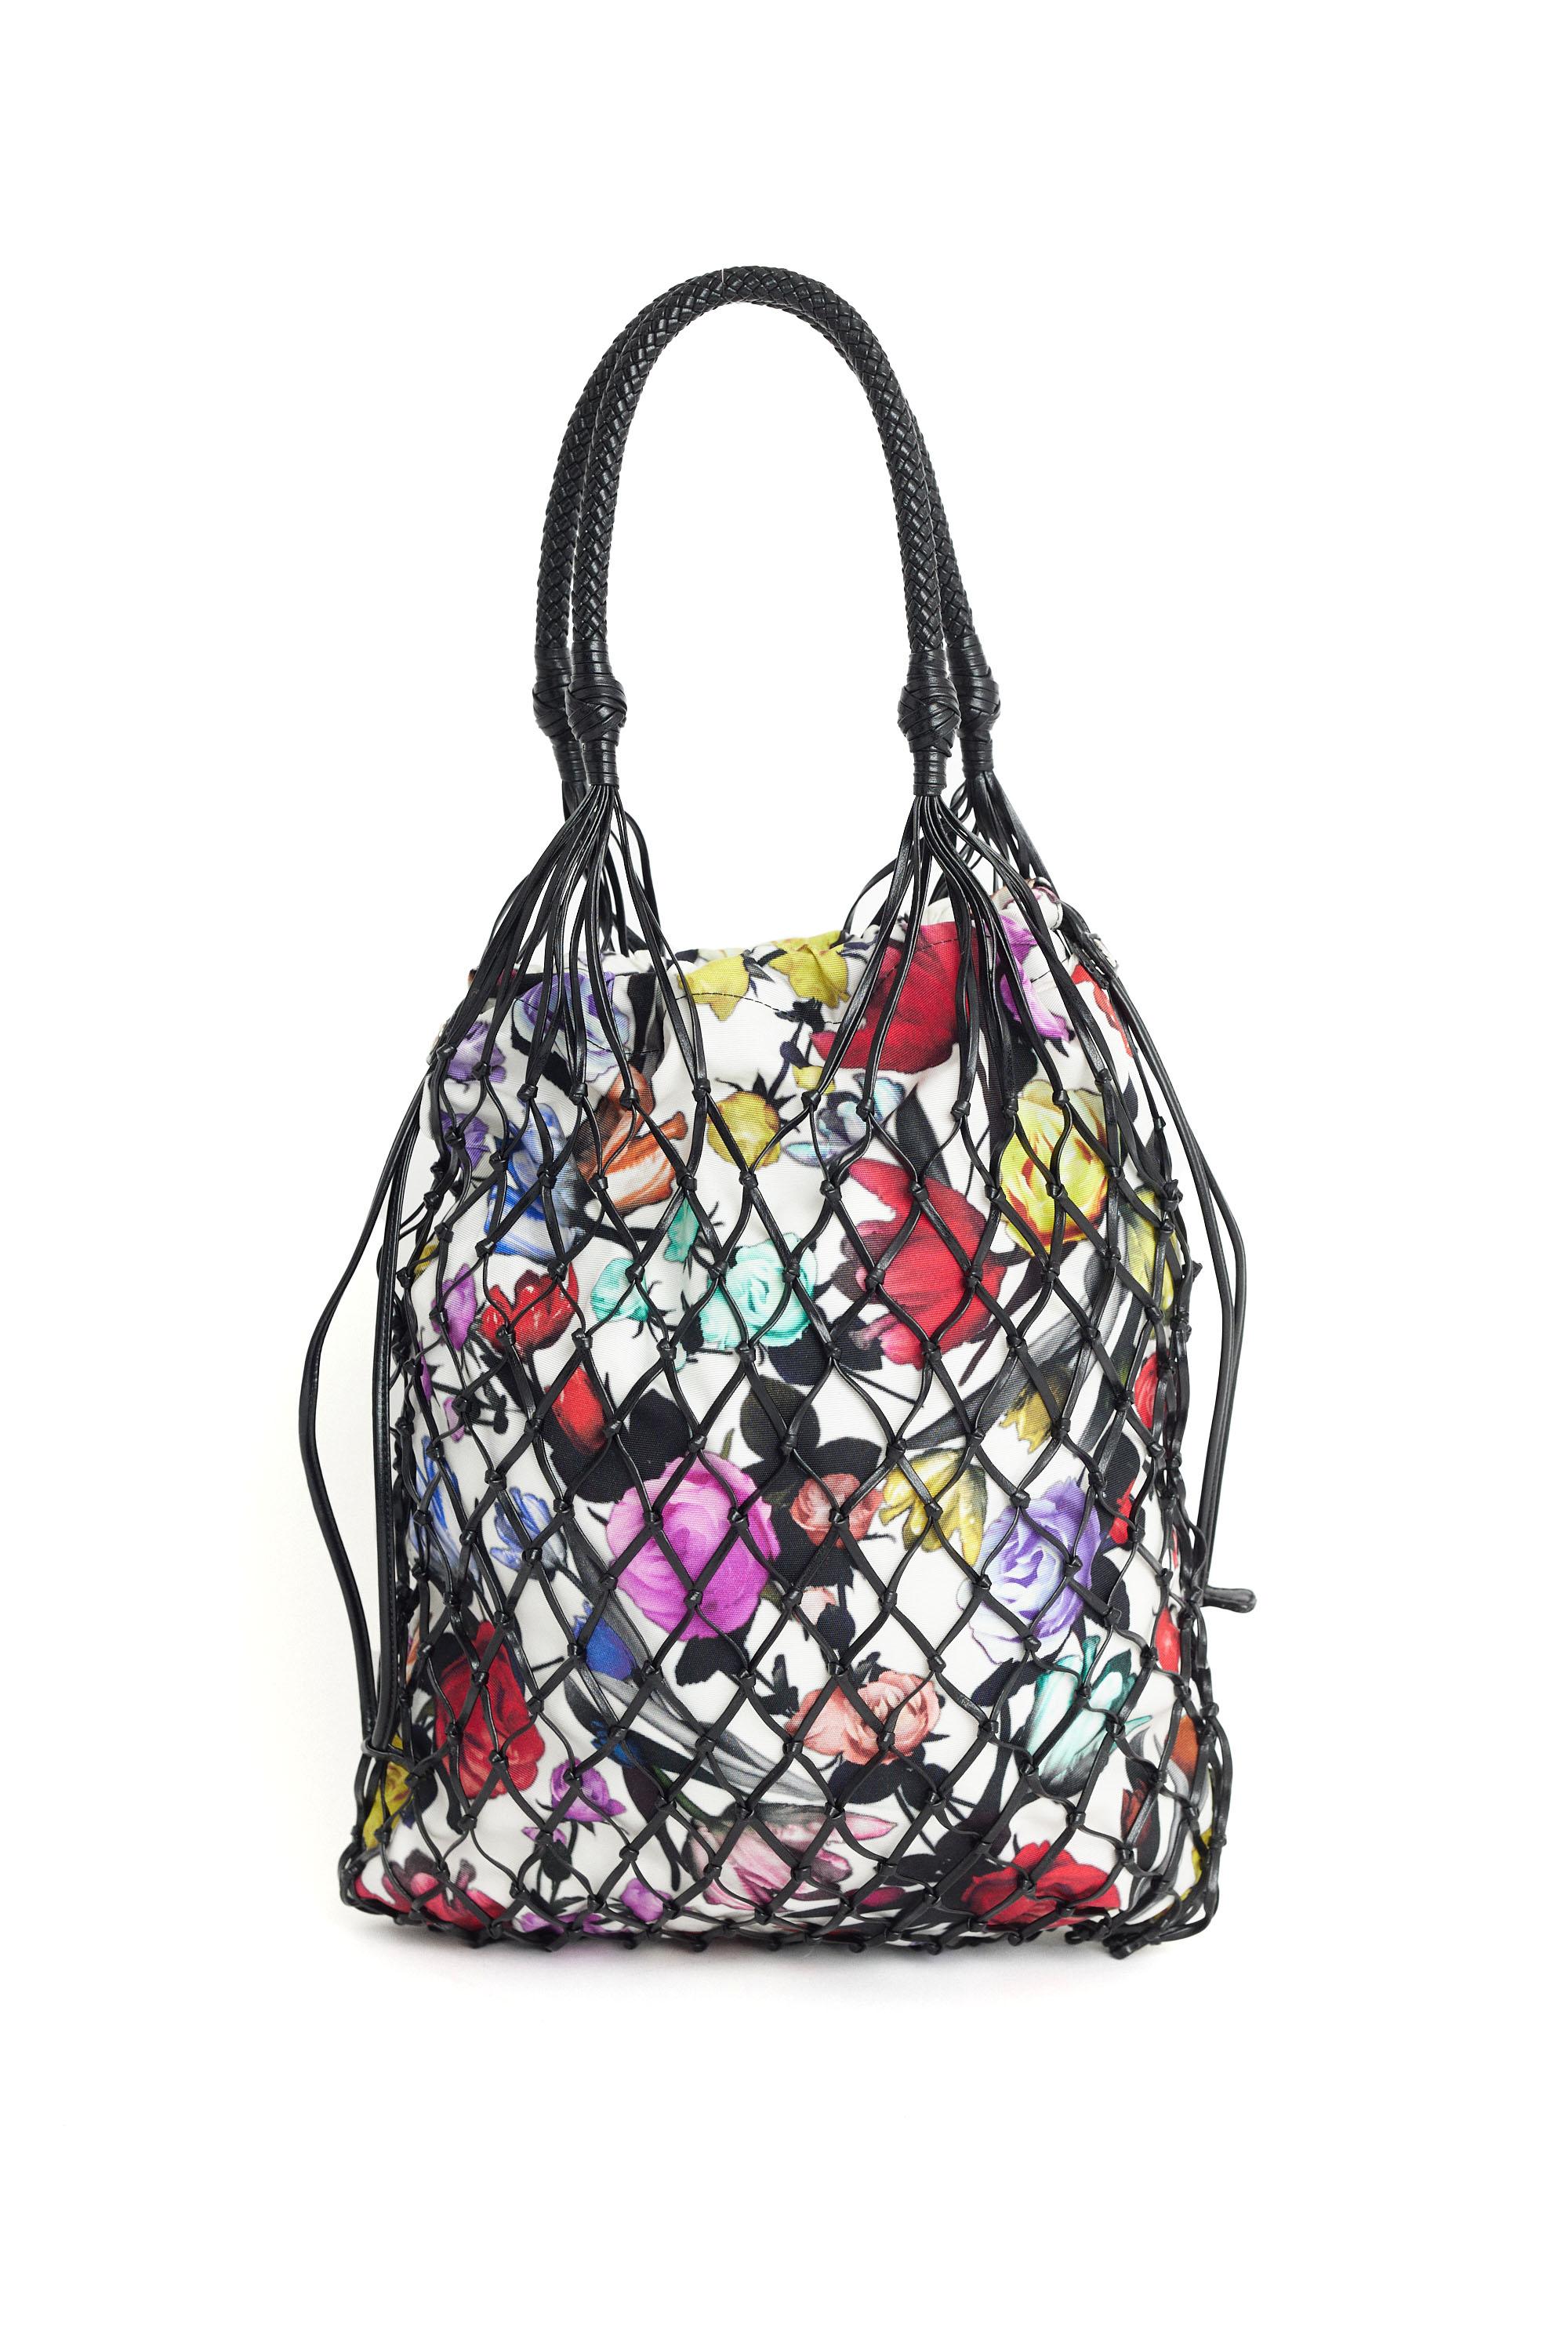 Net Floral Bag In Excellent Condition For Sale In London, GB